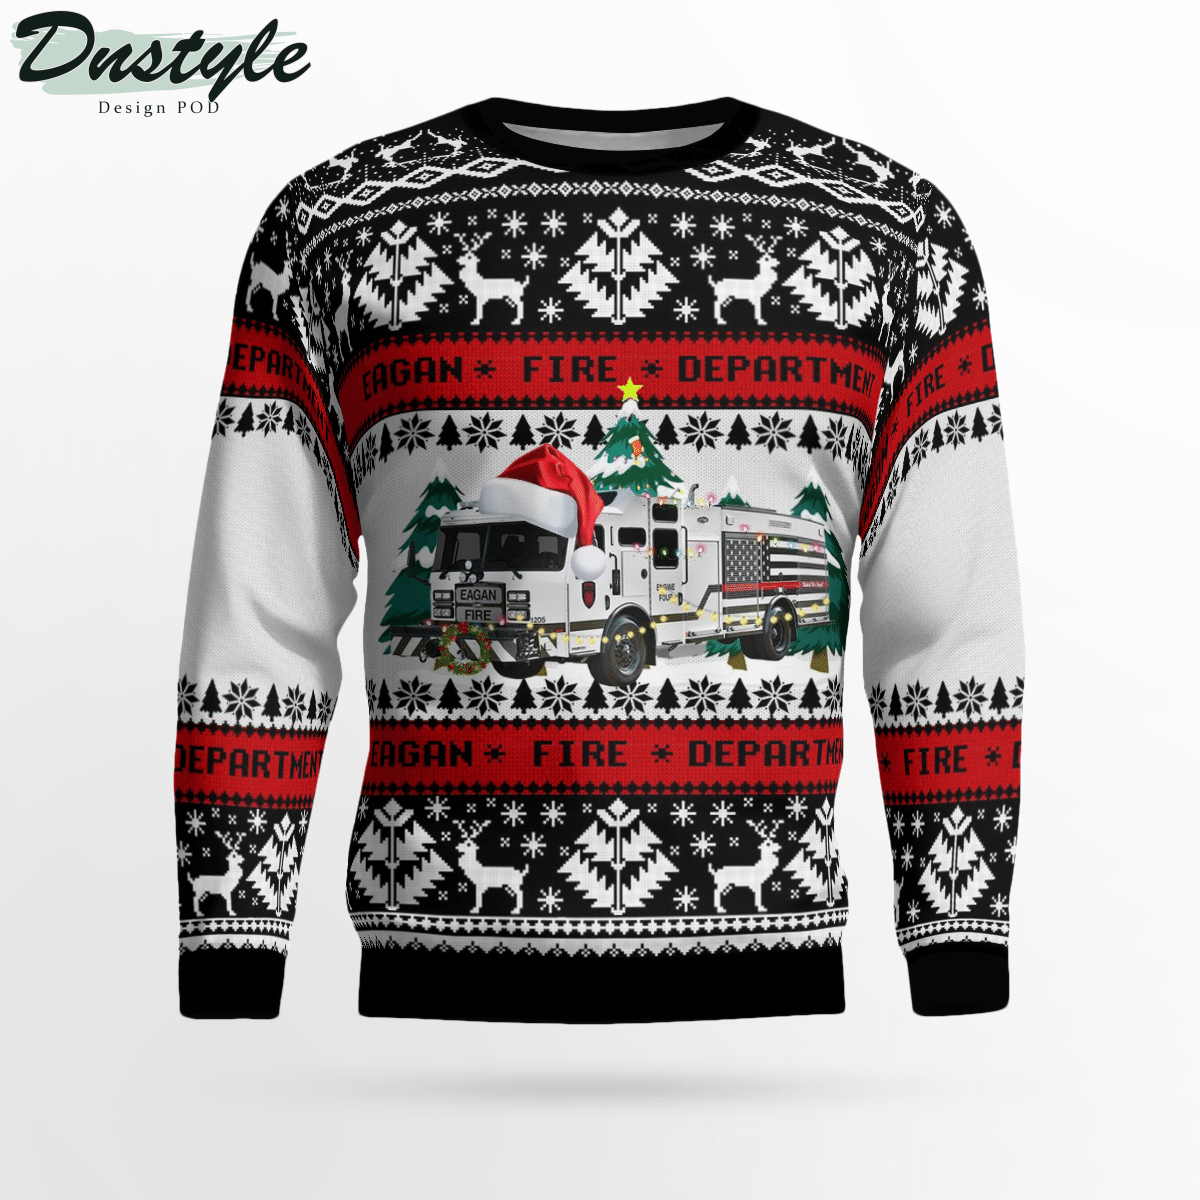 Eagan Fire Department Ugly Christmas Sweater